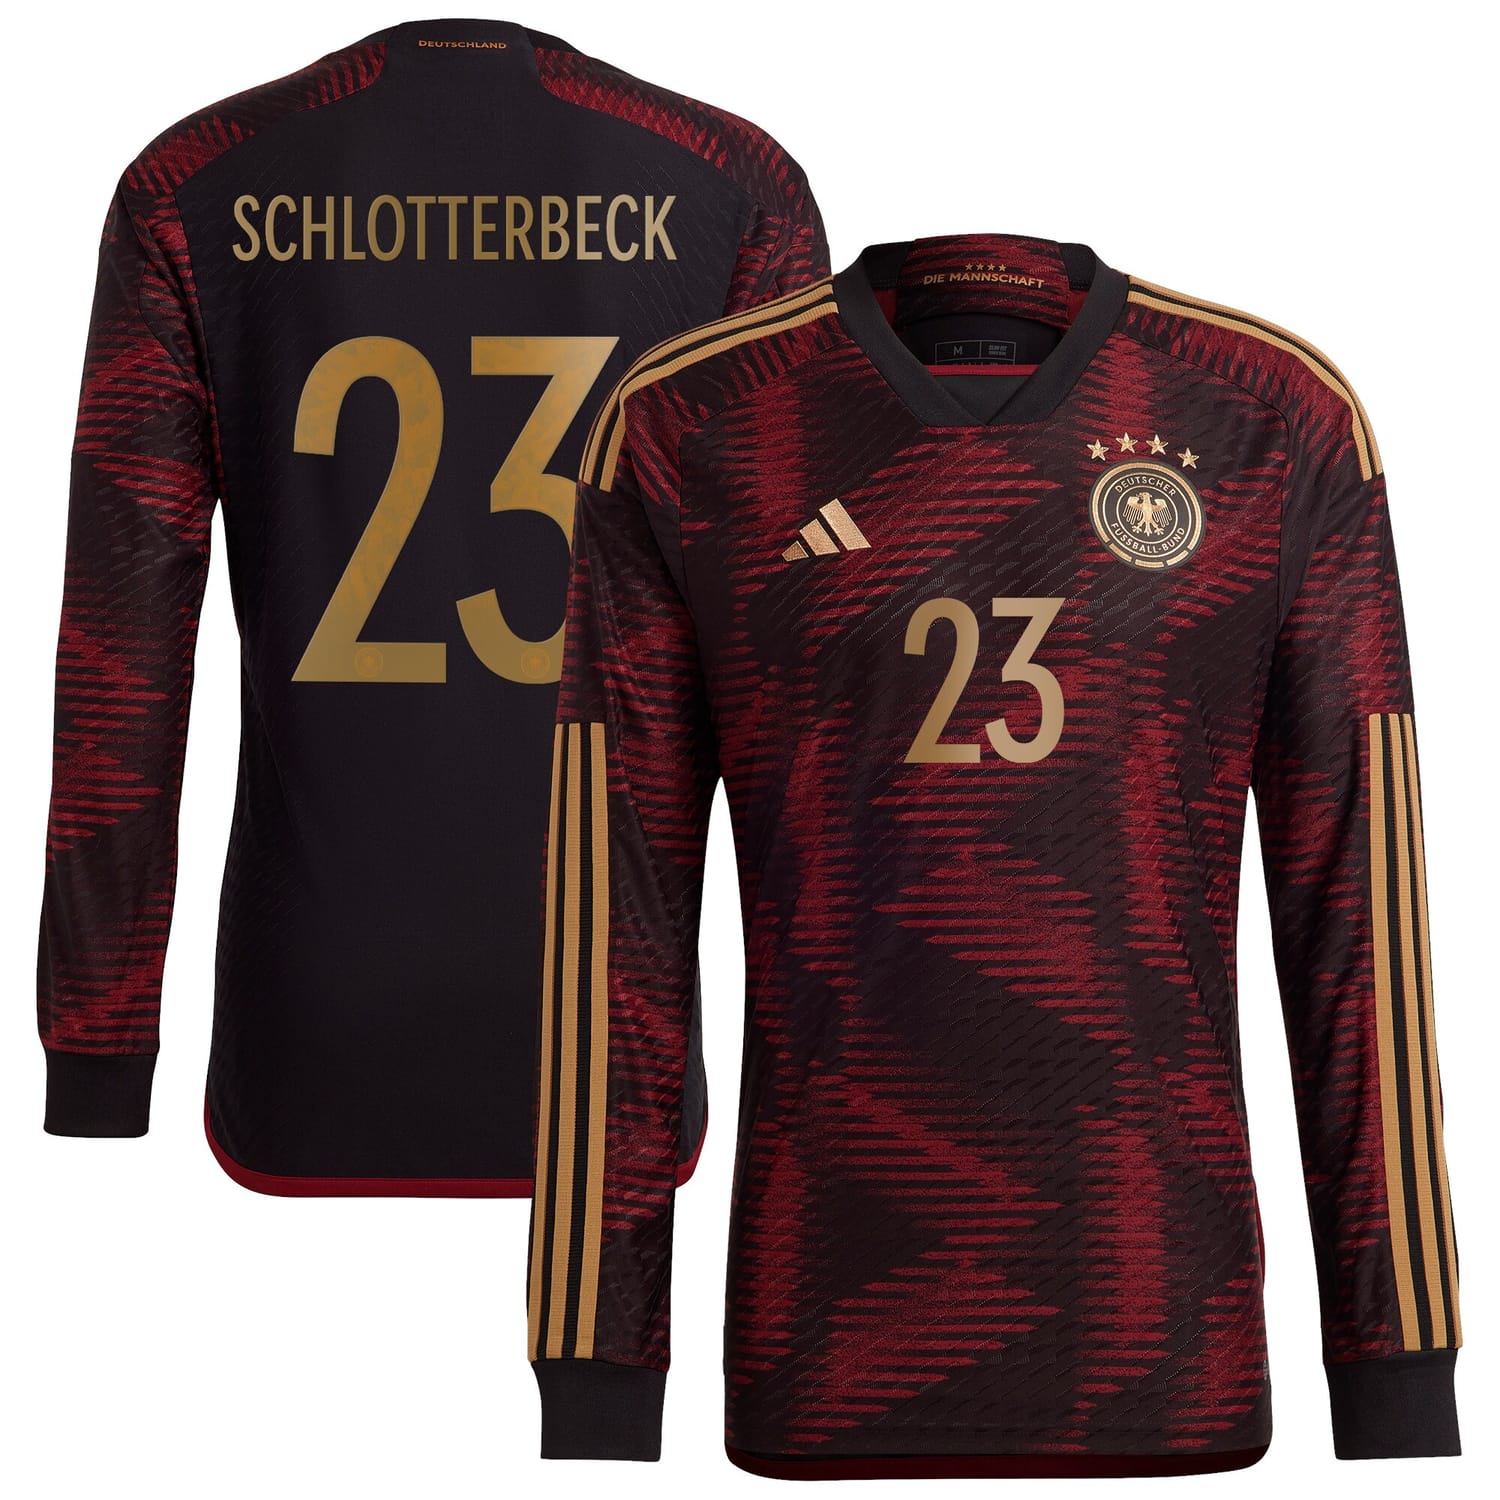 Germany National Team Away Authentic Jersey Shirt Long Sleeve player Nico Schlotterbeck 23 printing for Men